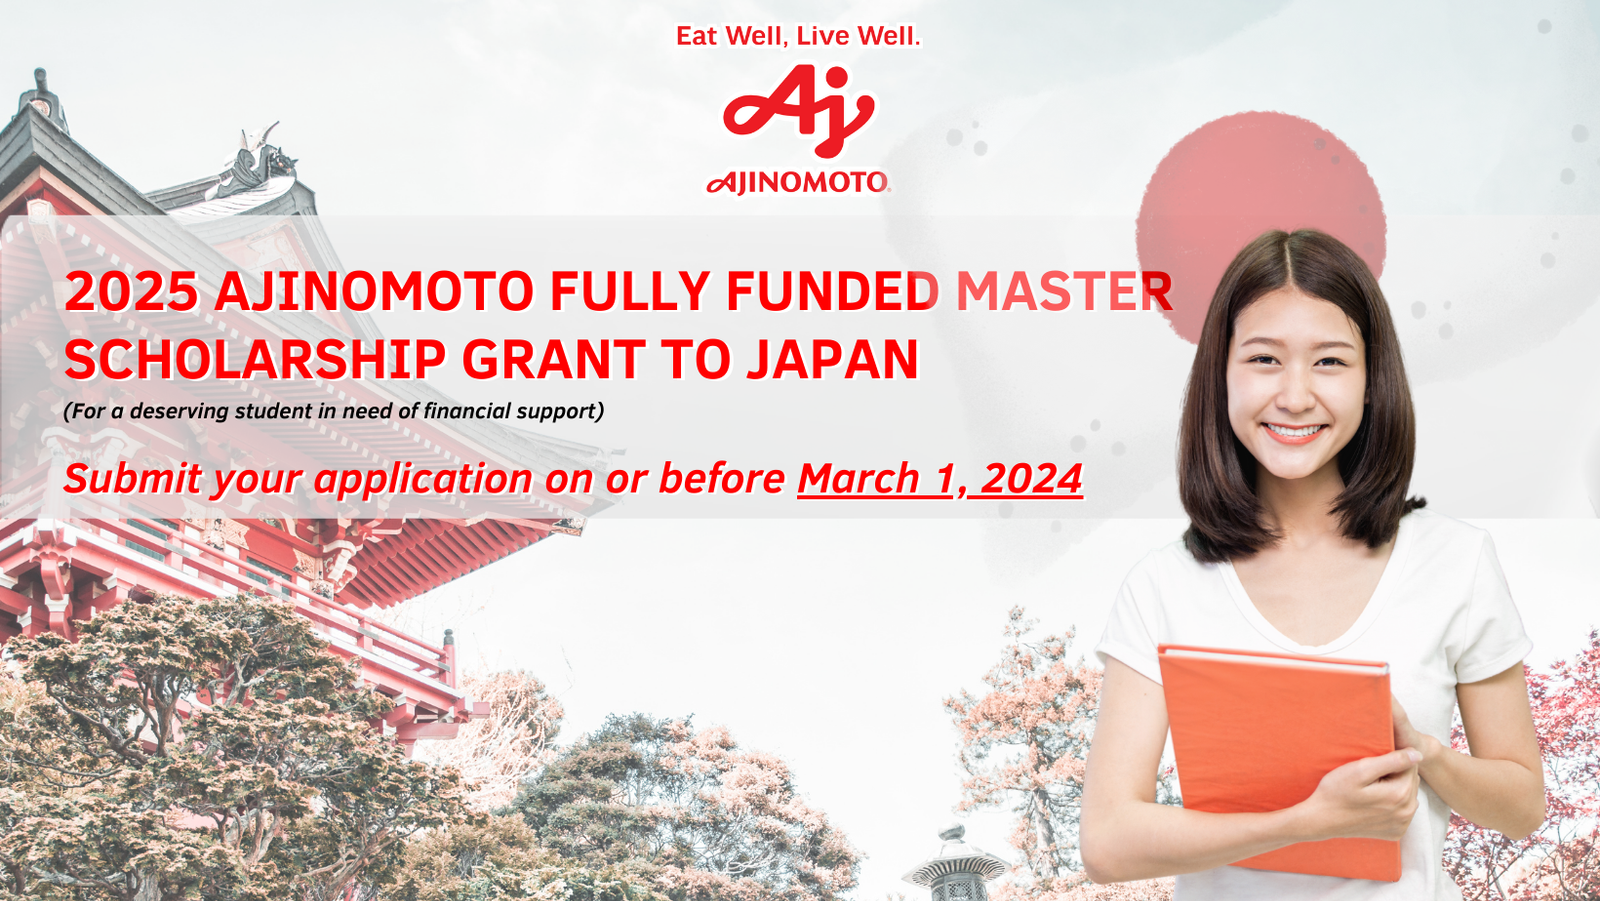 Ajinomoto supports food technology and nutrition education advancement Full scholarship grant for master education in Japan